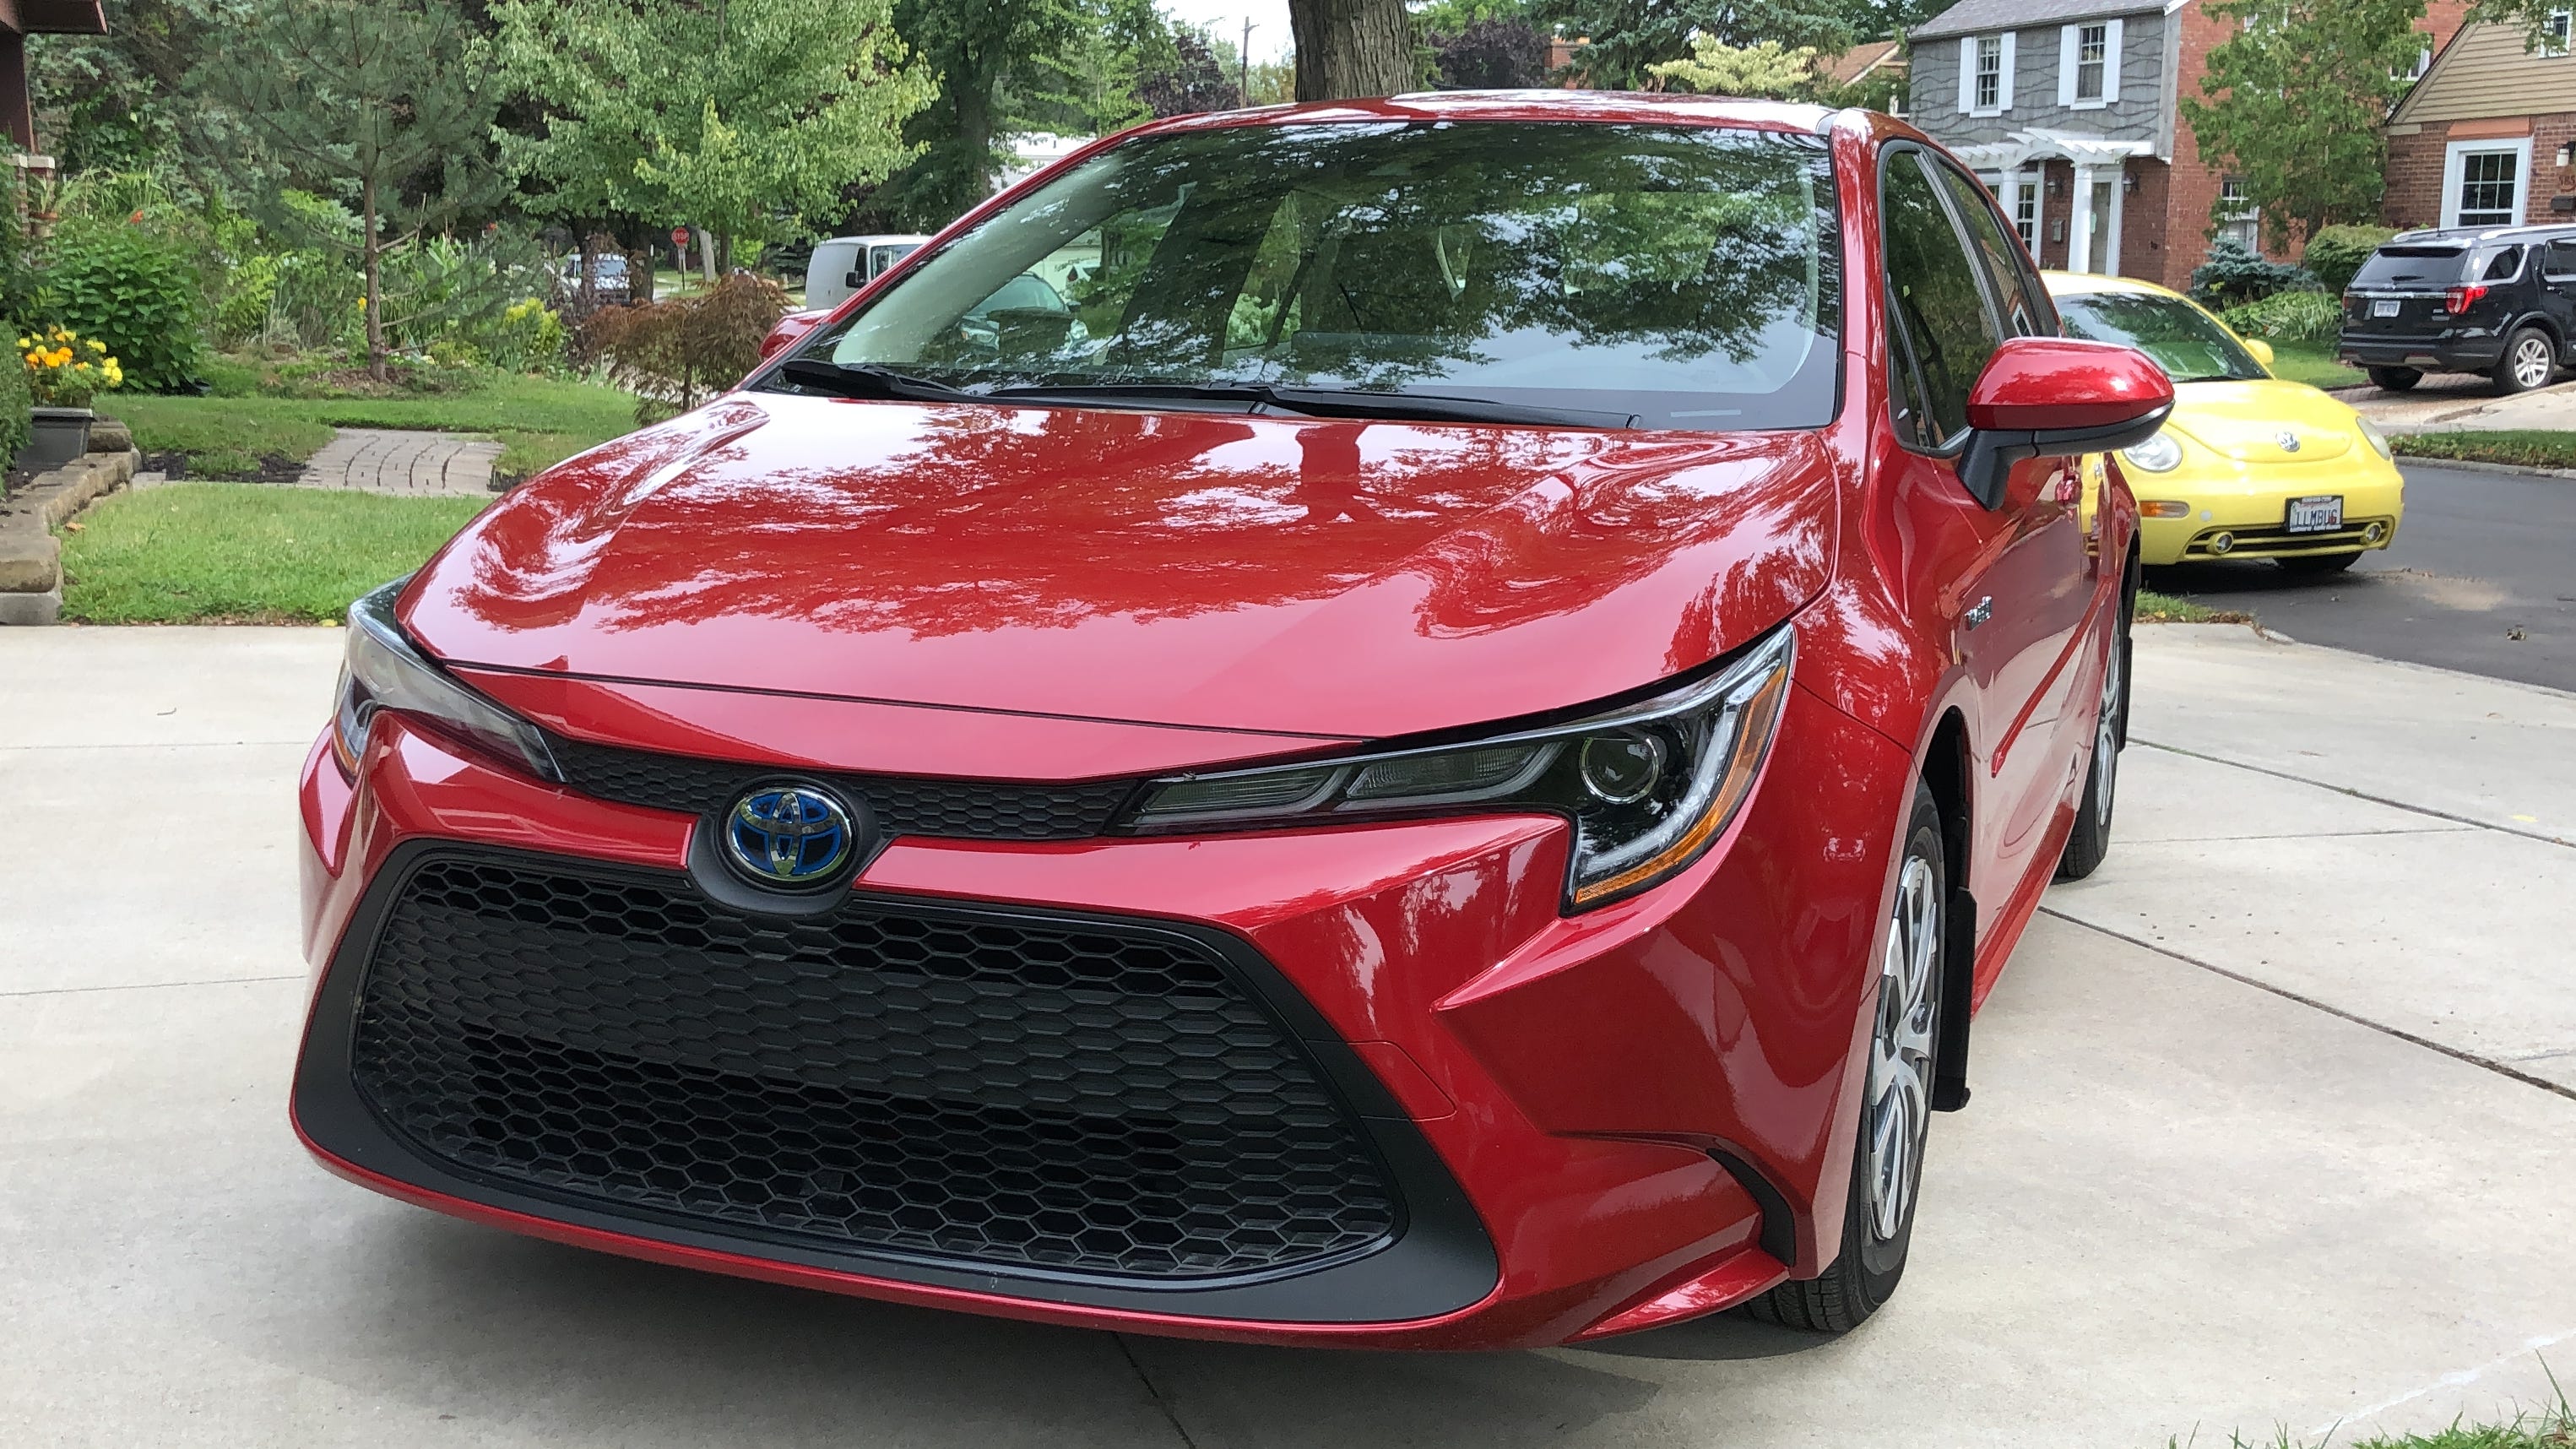 2020 Toyota Corolla Hybrid Every Car Should Be Like This